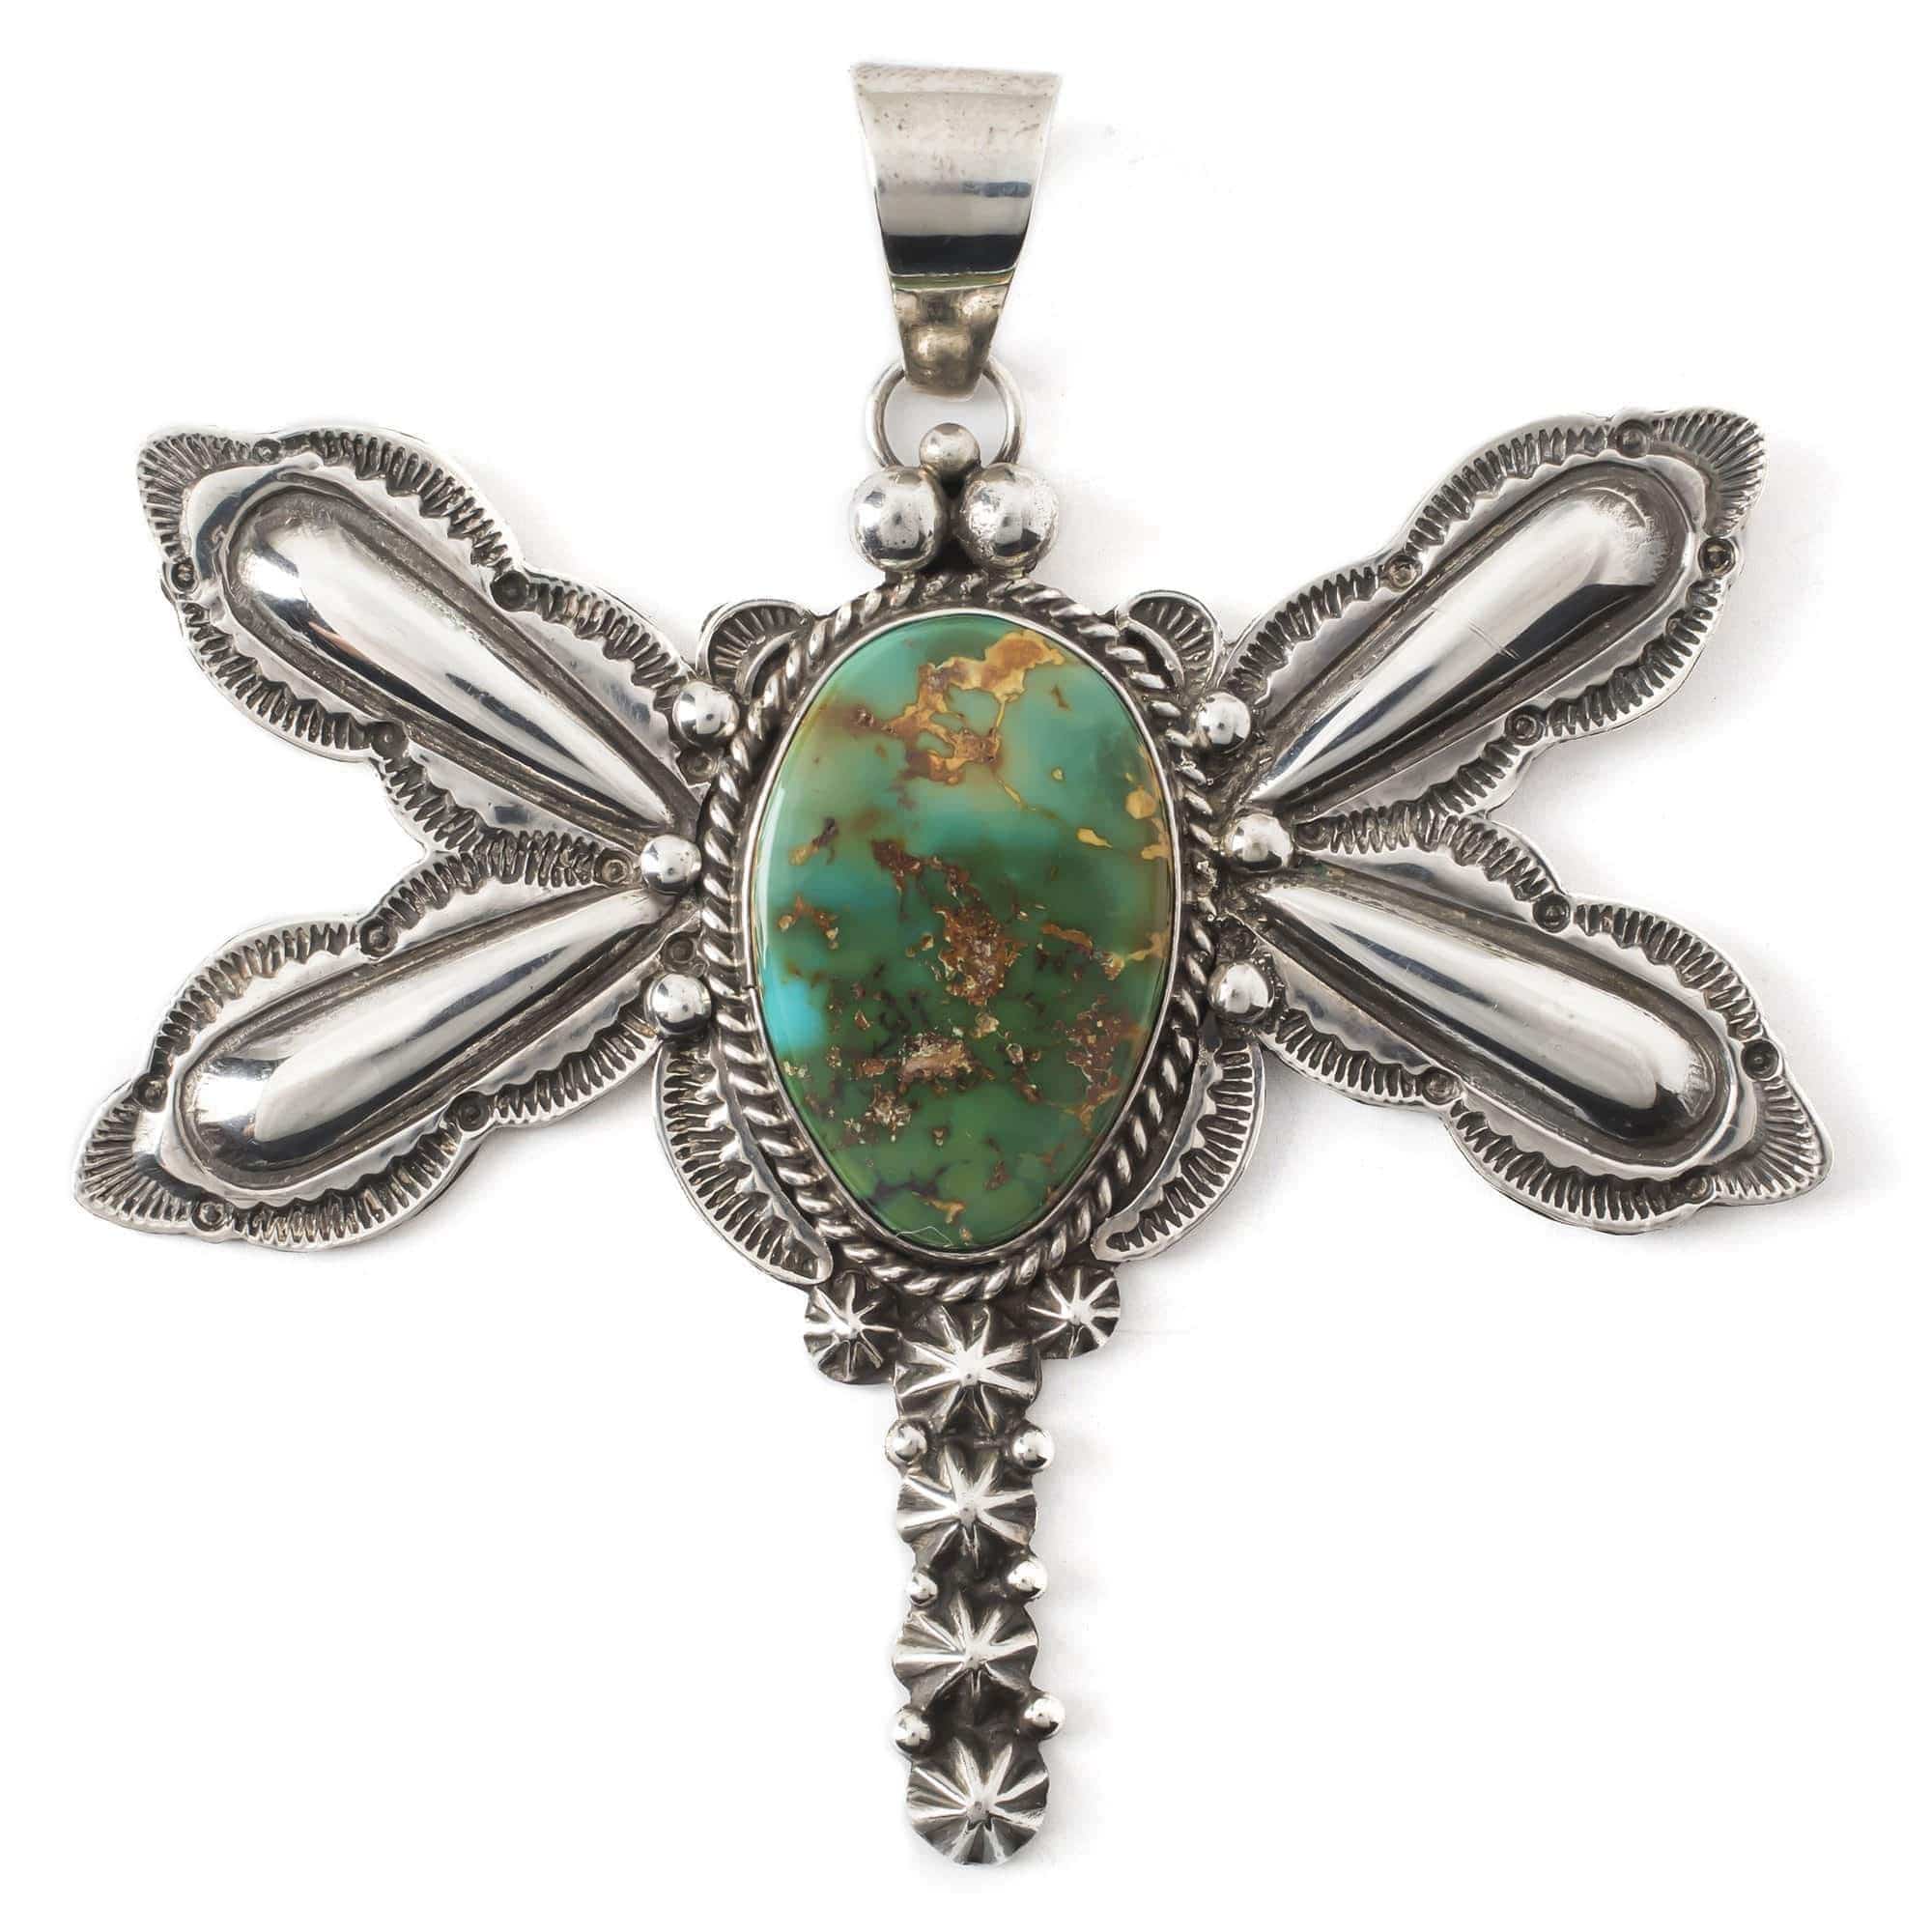 Kalifano Native American Jewelry Darryl Cadman Royston Turquoise  USA Native American Made 925 Sterling Silver Dragonfly Pendant NAN1500.002